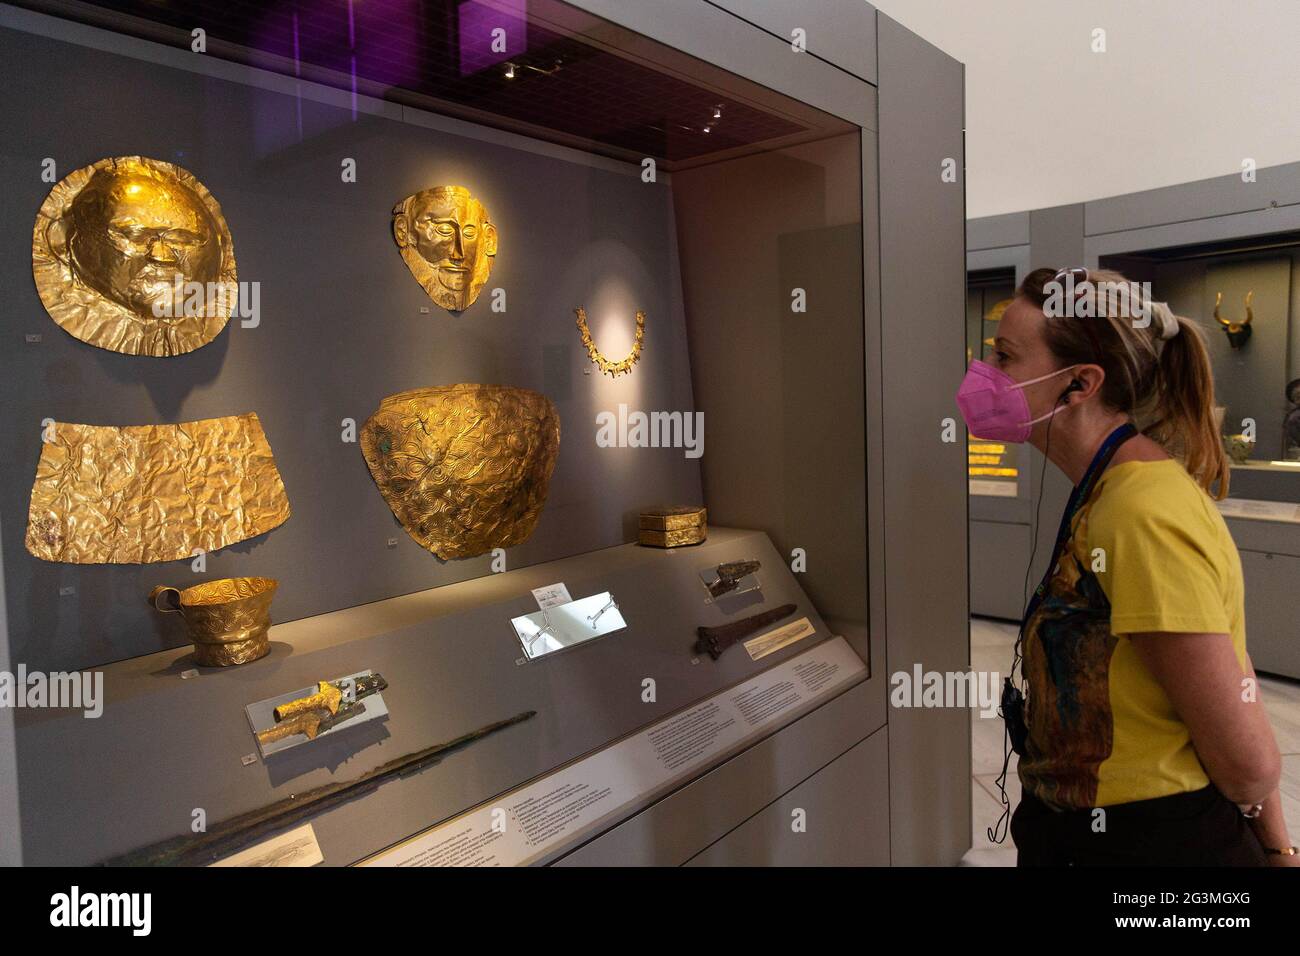 Athens, Greece. 7th June, 2021. A visiter views exhibits at the National Archaeological Museum in Athens, Greece, June 7, 2021. The imposing golden mask of Agamemnon welcomes visitors at the National Archaeological Museum here, standing out among other finds from the royal cemetery of the ancient city of Mycenae on the Peloponnese peninsula dating back to the 16th century BC. TO GO WITH 'Interview: Ancient Greek golden death-masks of Mycenae still engulfed in mystery, says archaeologist' Credit: Marios Lolos/Xinhua/Alamy Live News Stock Photo